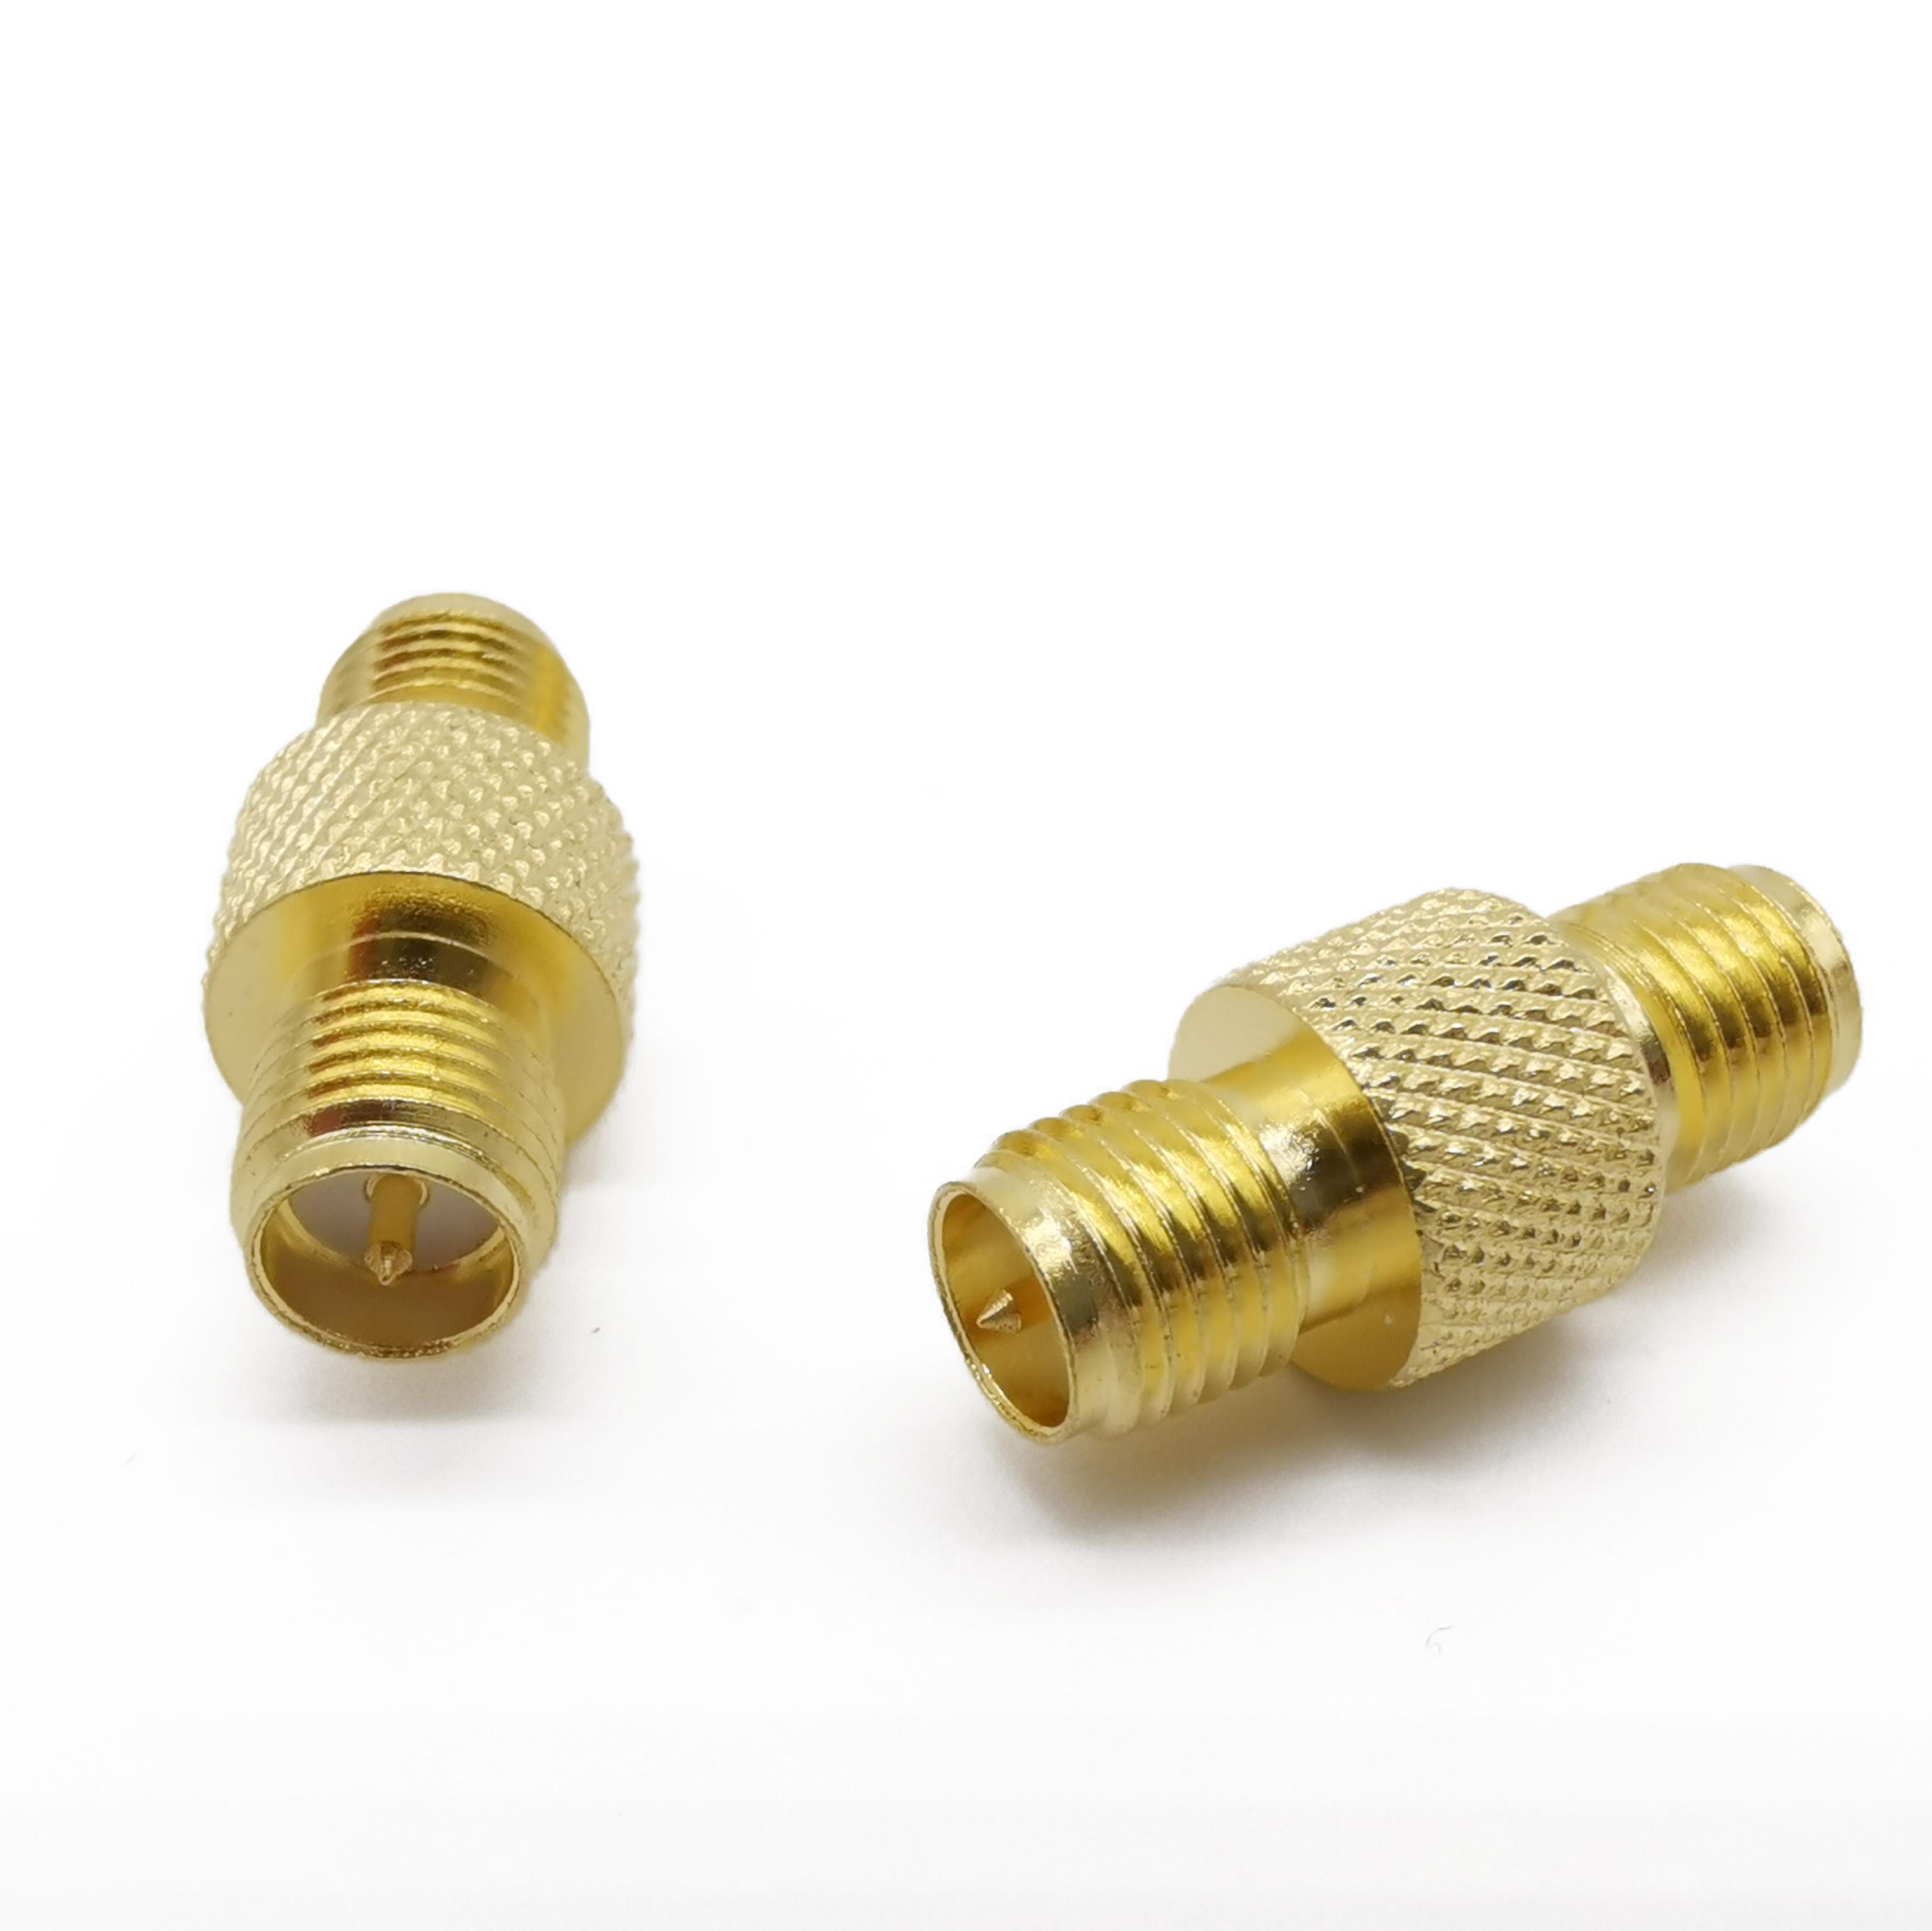 10Pcs RF Coaxial Cable Adapter SMA Female Jack to RP SMA Female Jack Straight Gold plated RF SMA to SMA female Connector Coupler